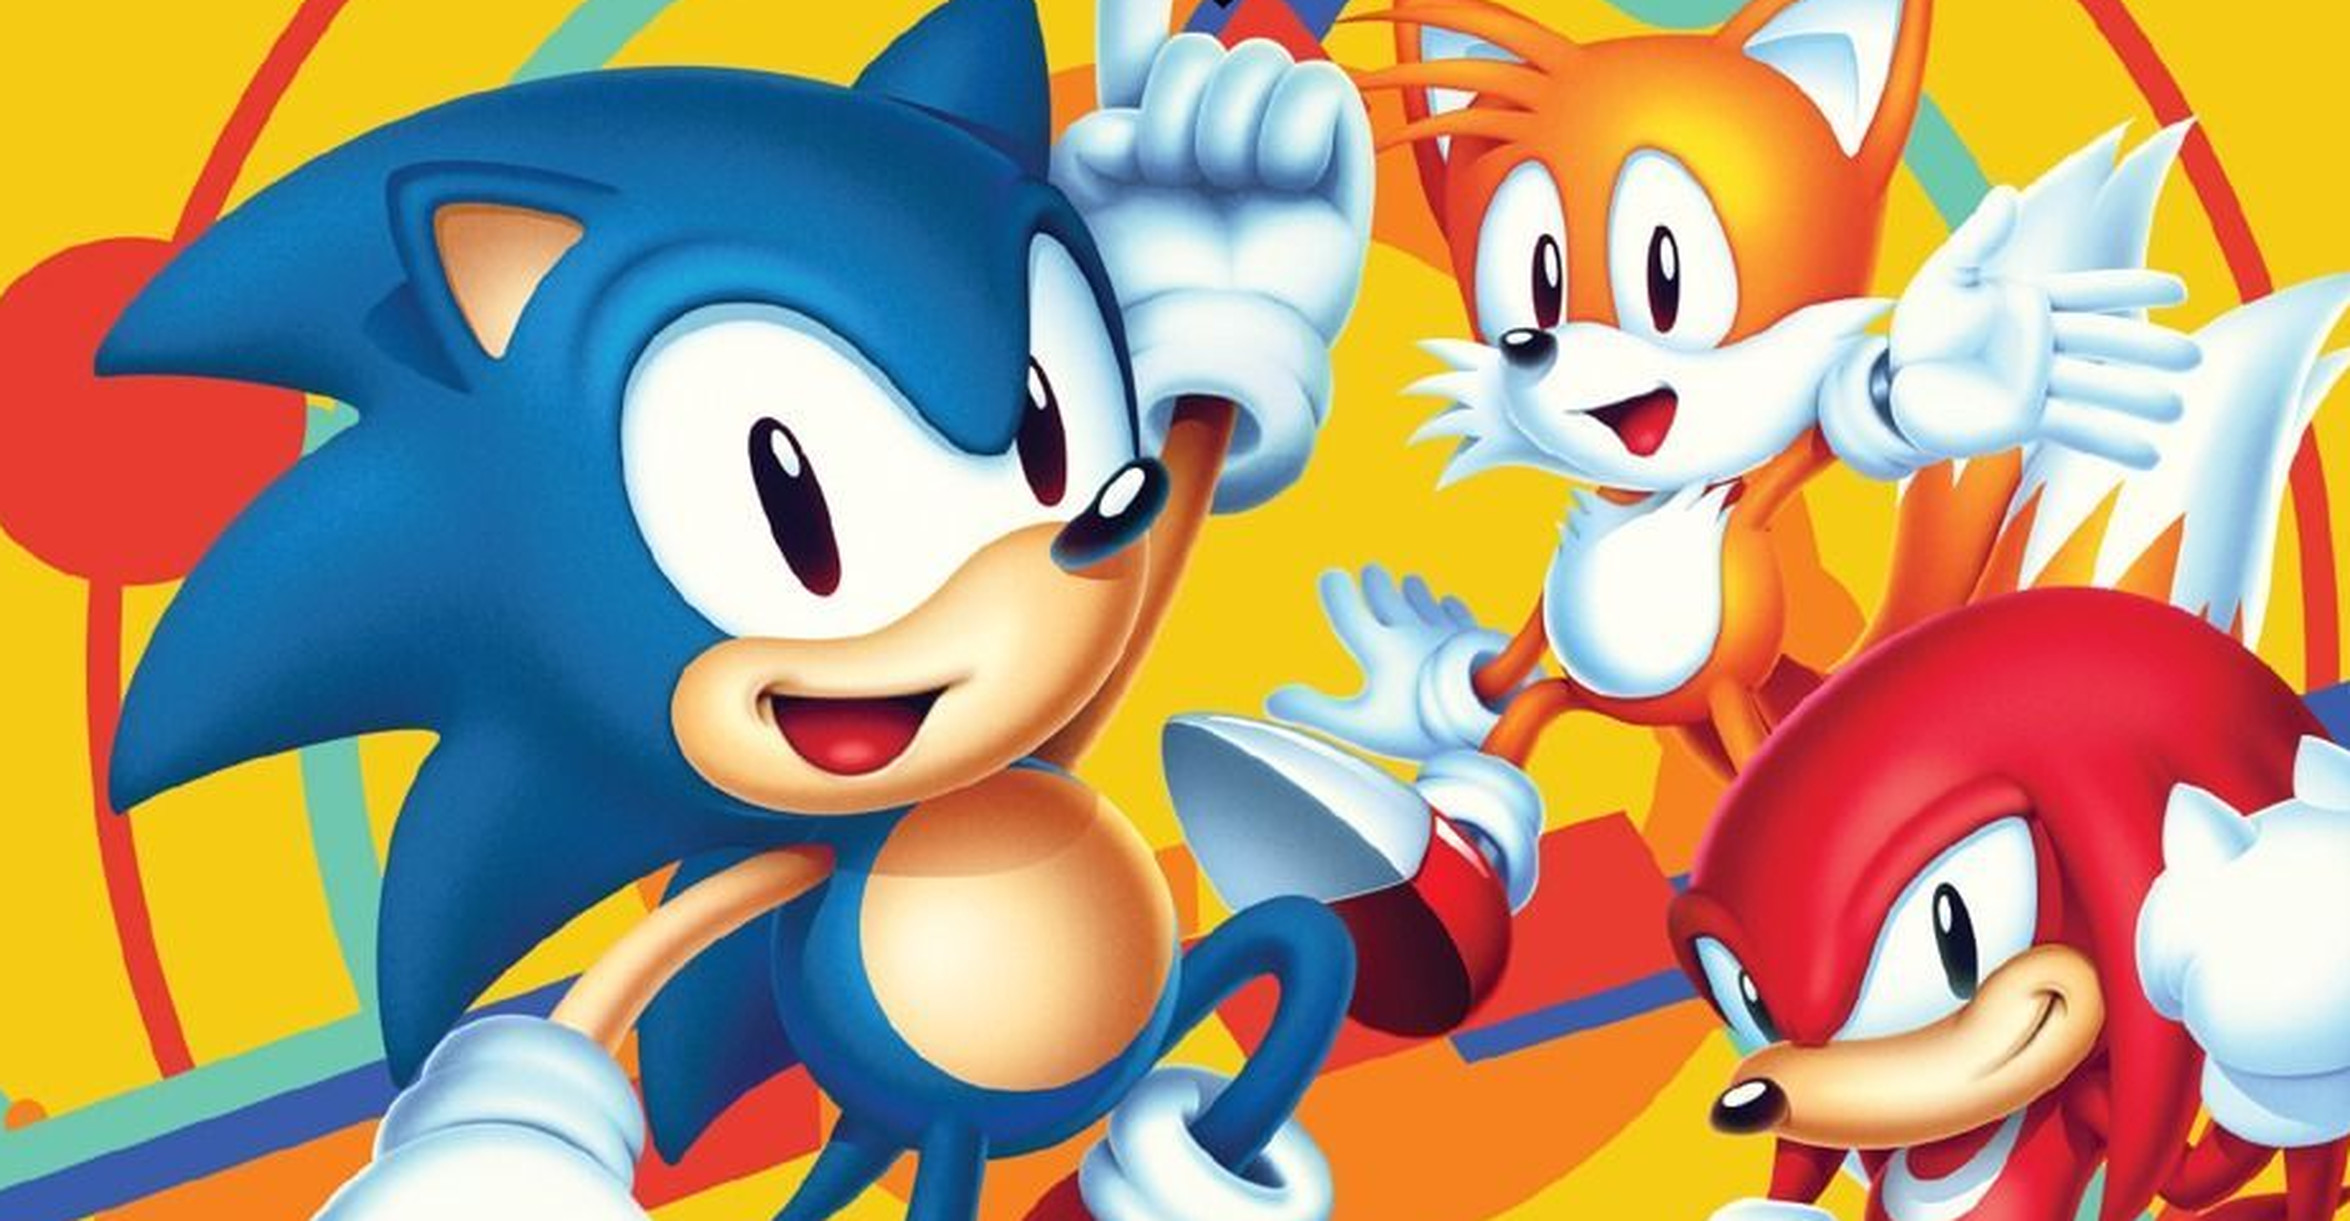 The Reception of Sonic Mania Will Help Sega “Figure Out the Direction of Future Titles”